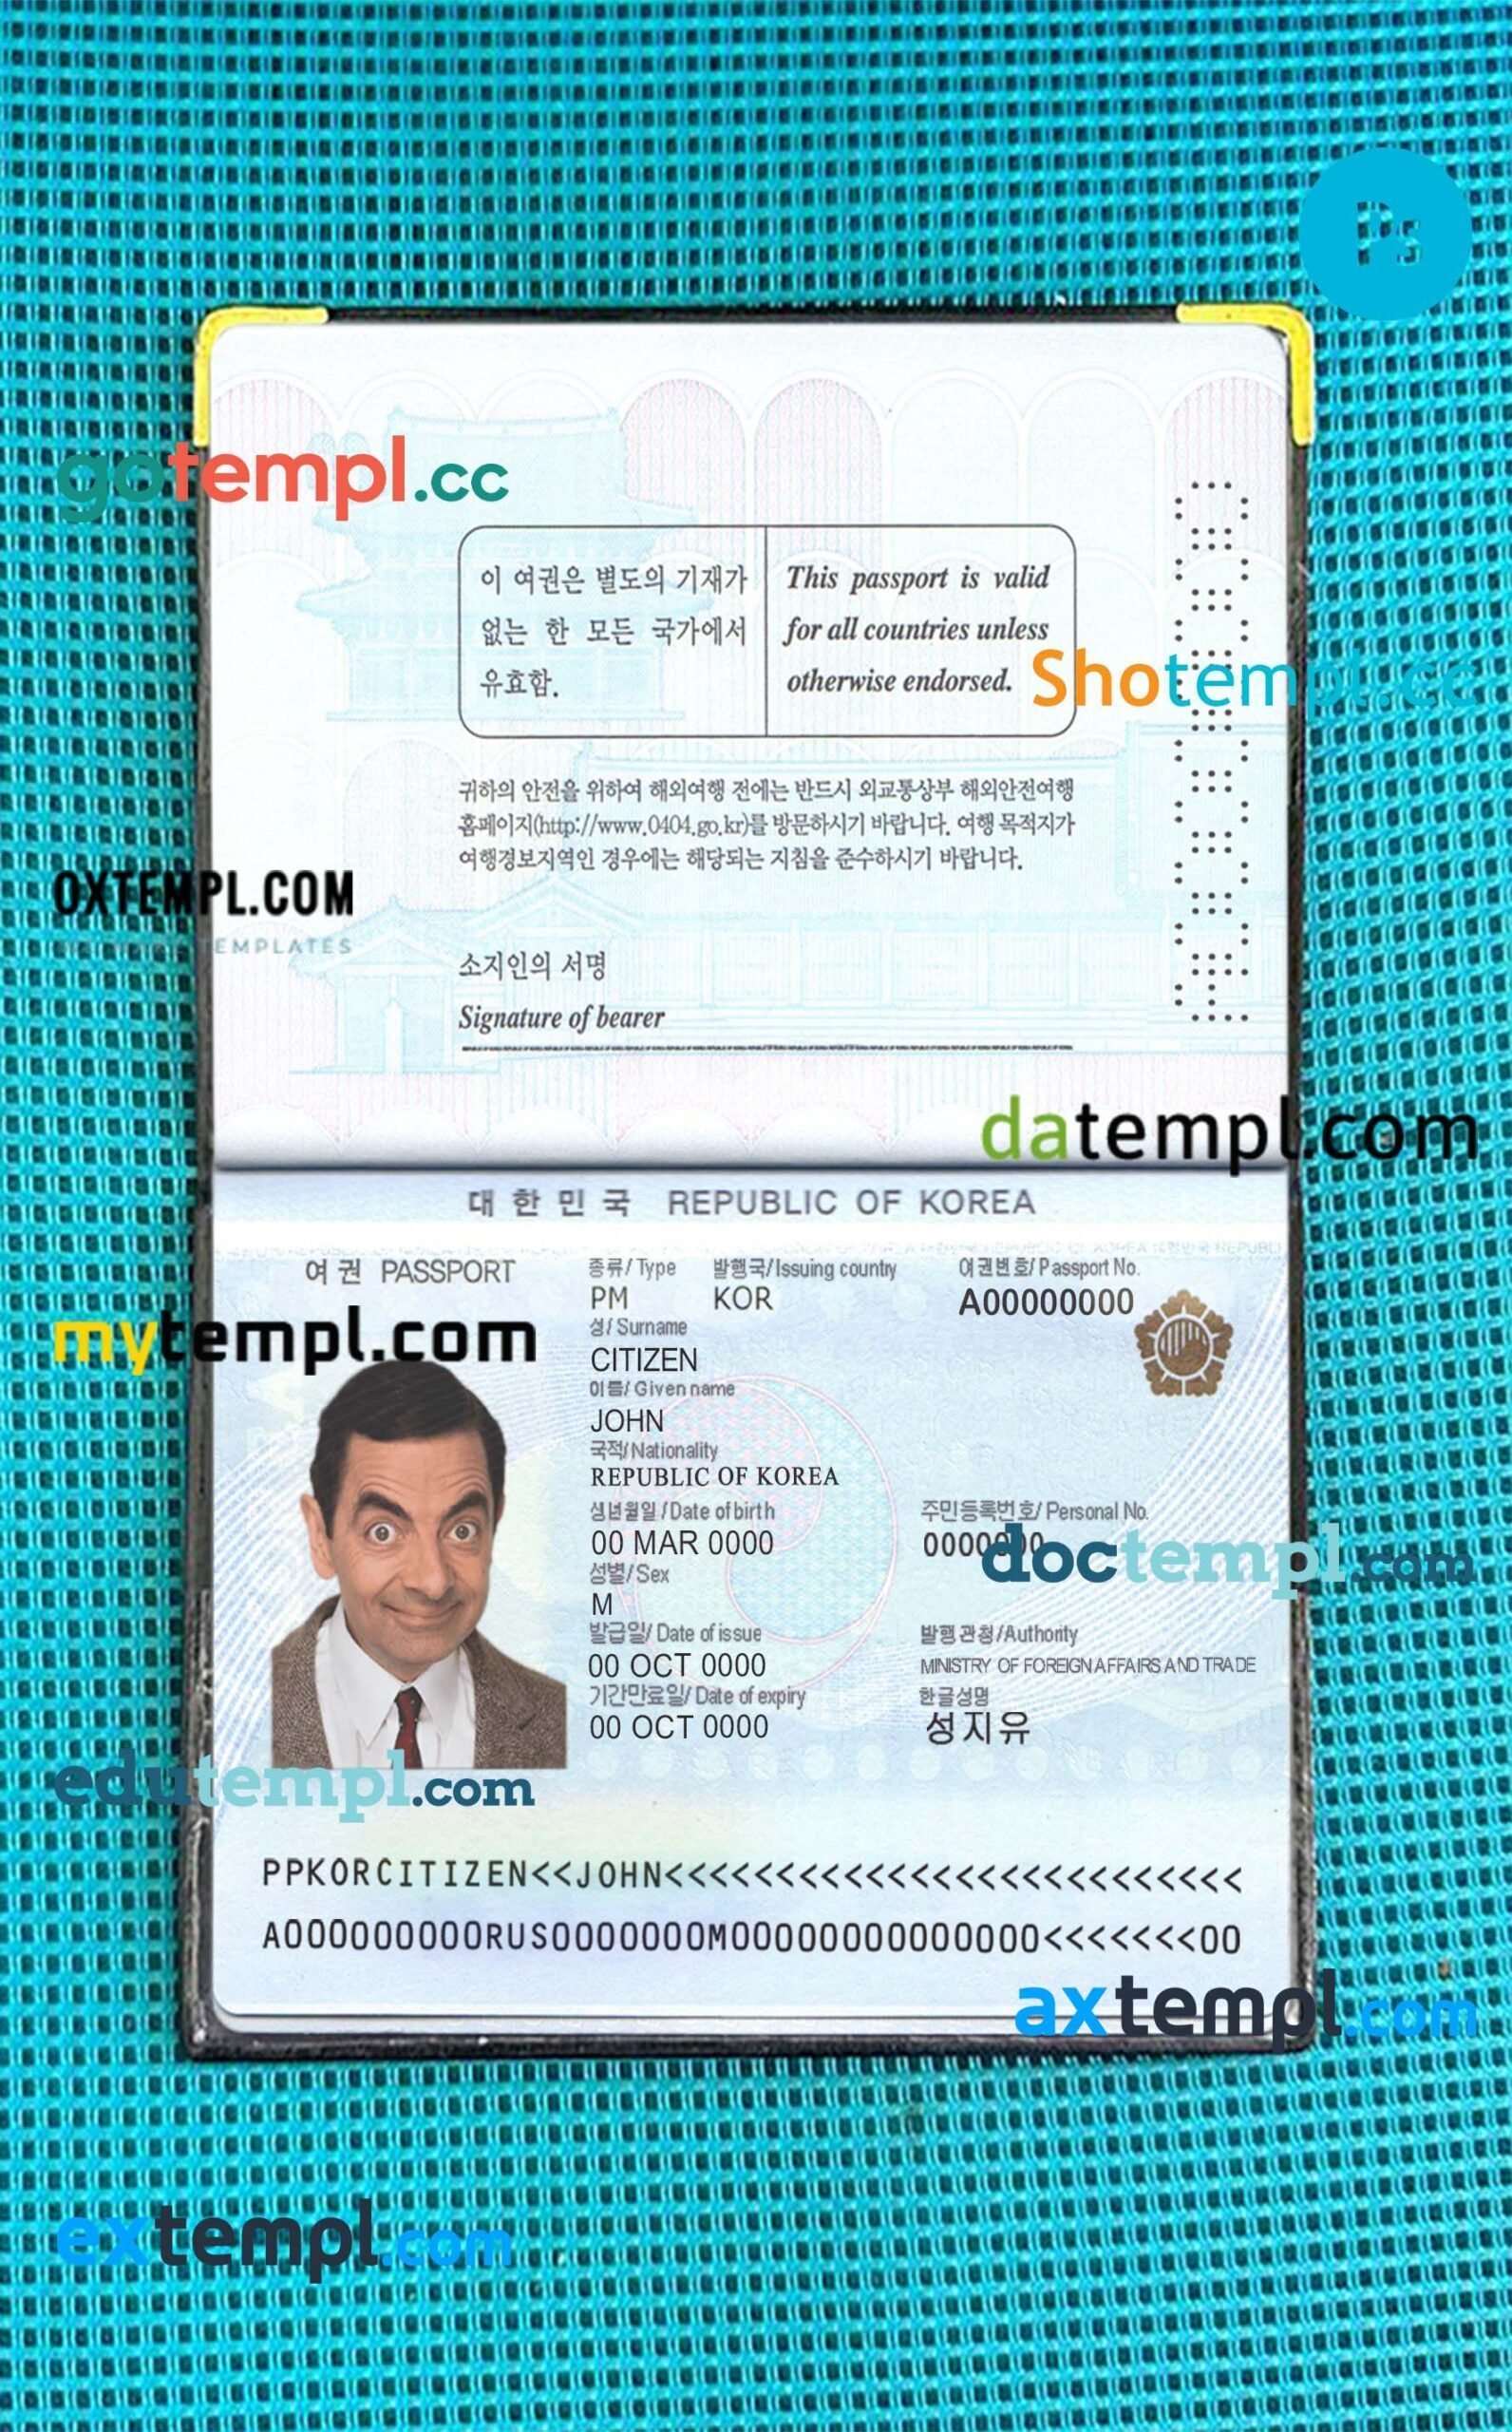 South Korea passport PSD files, scan and photograghed image, 2 in 1